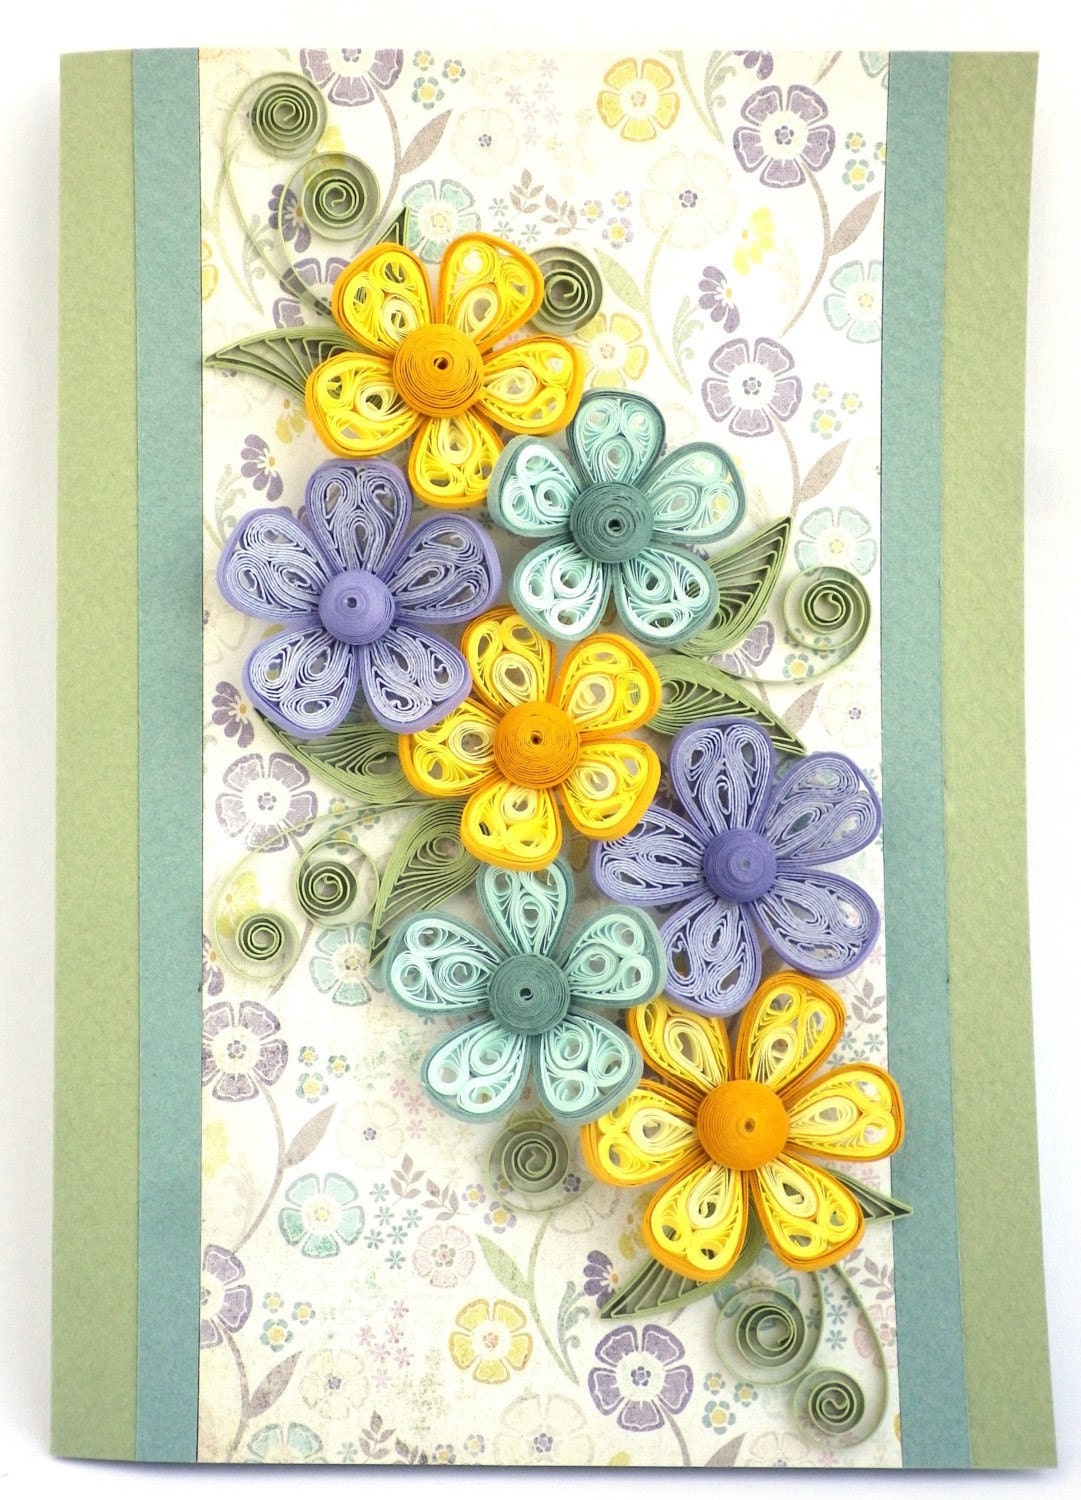 Quilling Greeting card in mauve lilac pastel colors for any